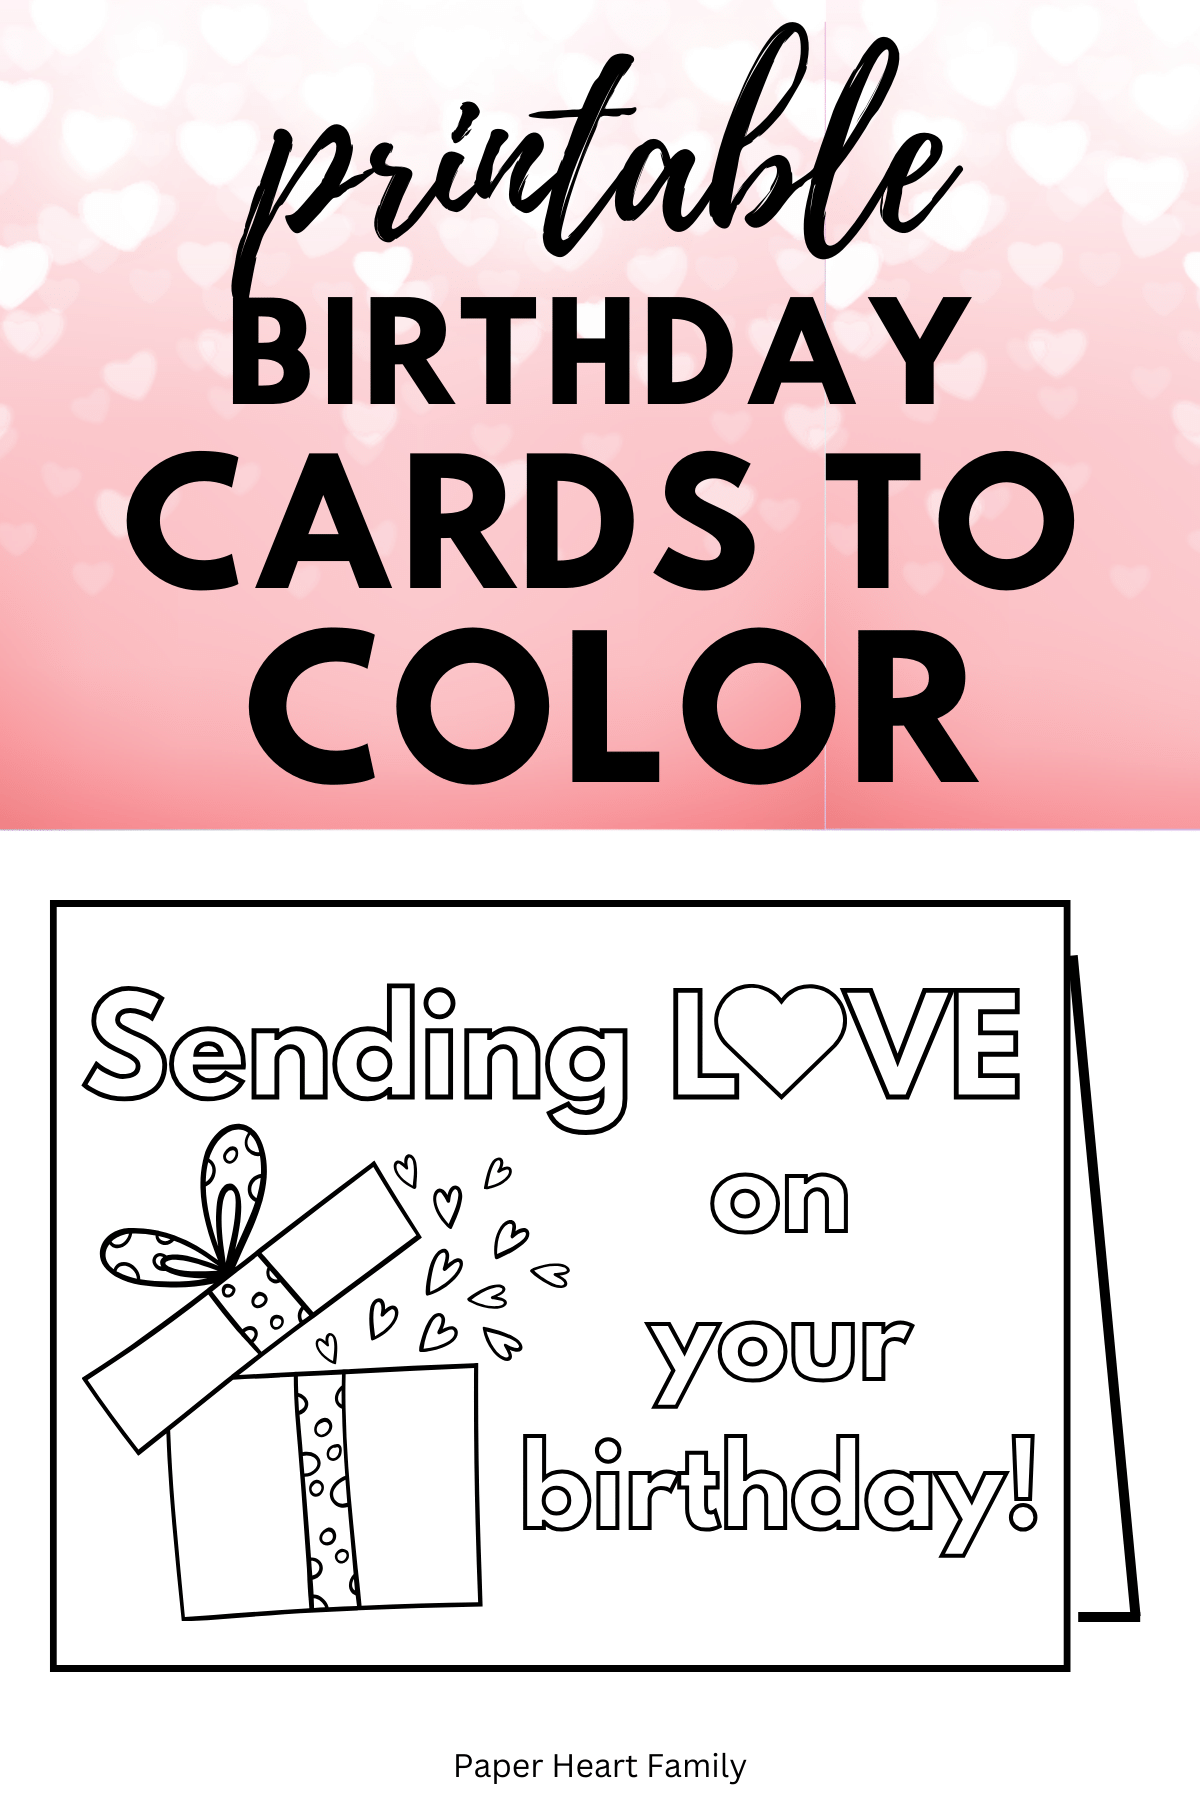 Present graphic with hearts coming out of lid that says "Sending LOVE on your birthday!"